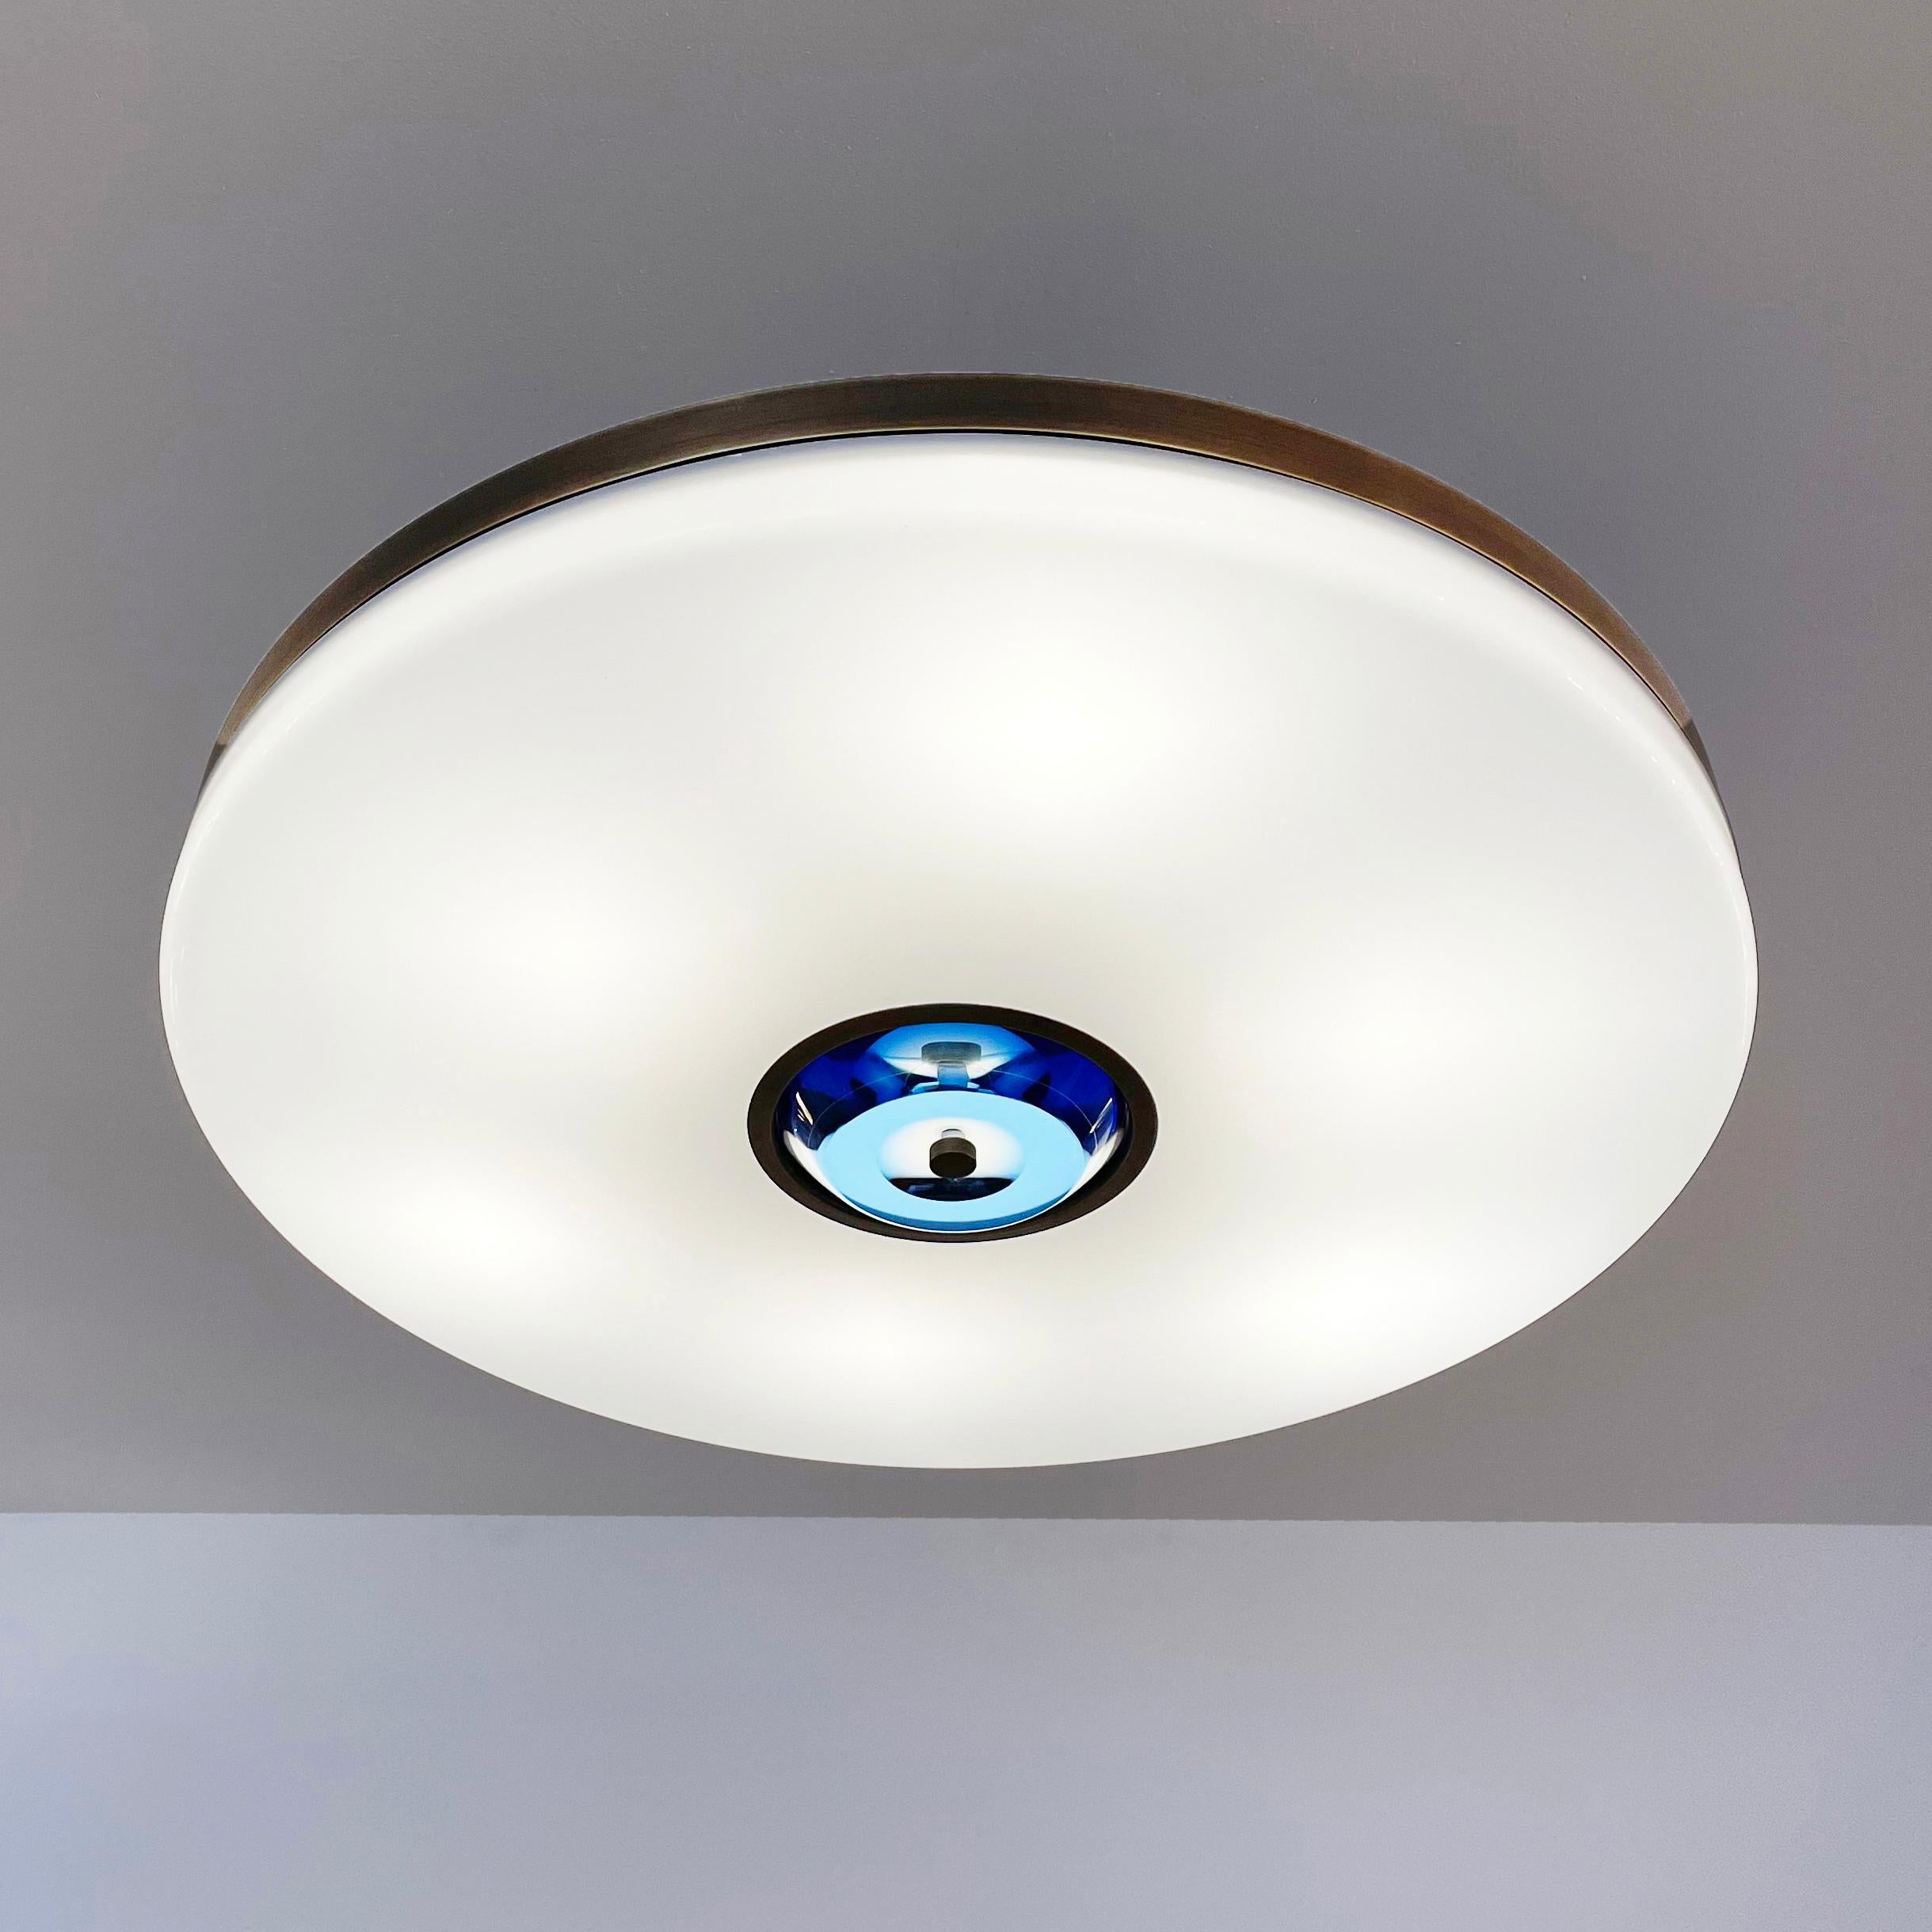 Contemporary Iris Ceiling Light by Gaspare Asaro-Turquoise Glass Version For Sale